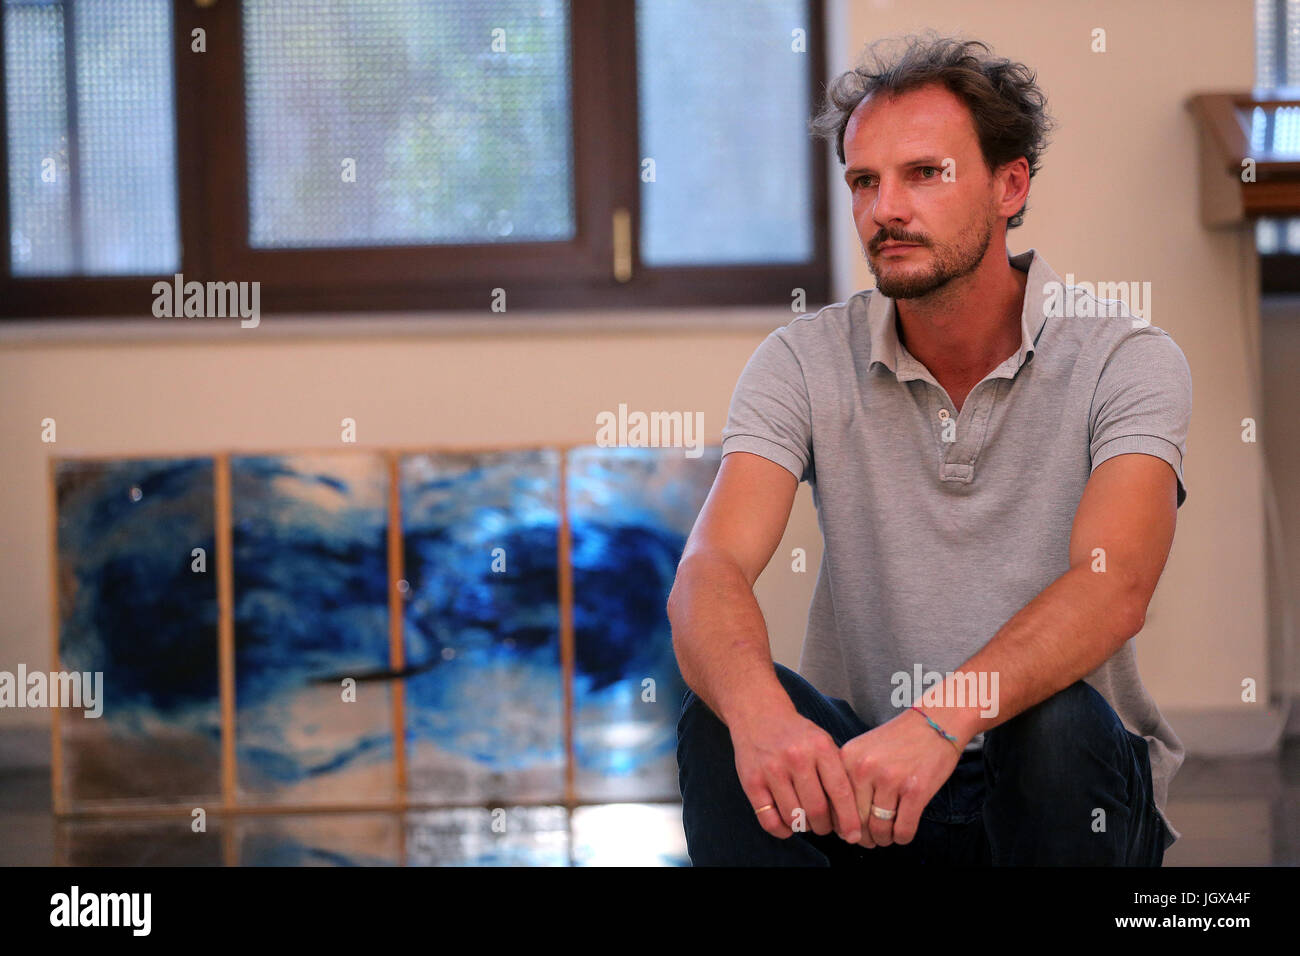 (170711) -- ATHENS, July 11, 2017 (Xinhua) -- Photo taken on July 5 shows Italian artist Paolo Ghezzi among the works he has created with Nadia Antonello at the exhibition 'All the Stars, All the Seas' in Athens, Greece. Two years into the crisis which has tested Europe, Italian art collective Antonello Ghezzi chose Greece, a country at the forefront of the mass influx of refugees and migrants, to launch their new project aimed to convey the message of unity and solidarity. 'The exhibition 'All the Stars, All the Seas' is dedicated to the migrants and refugees, to all people adrift and to the Stock Photo